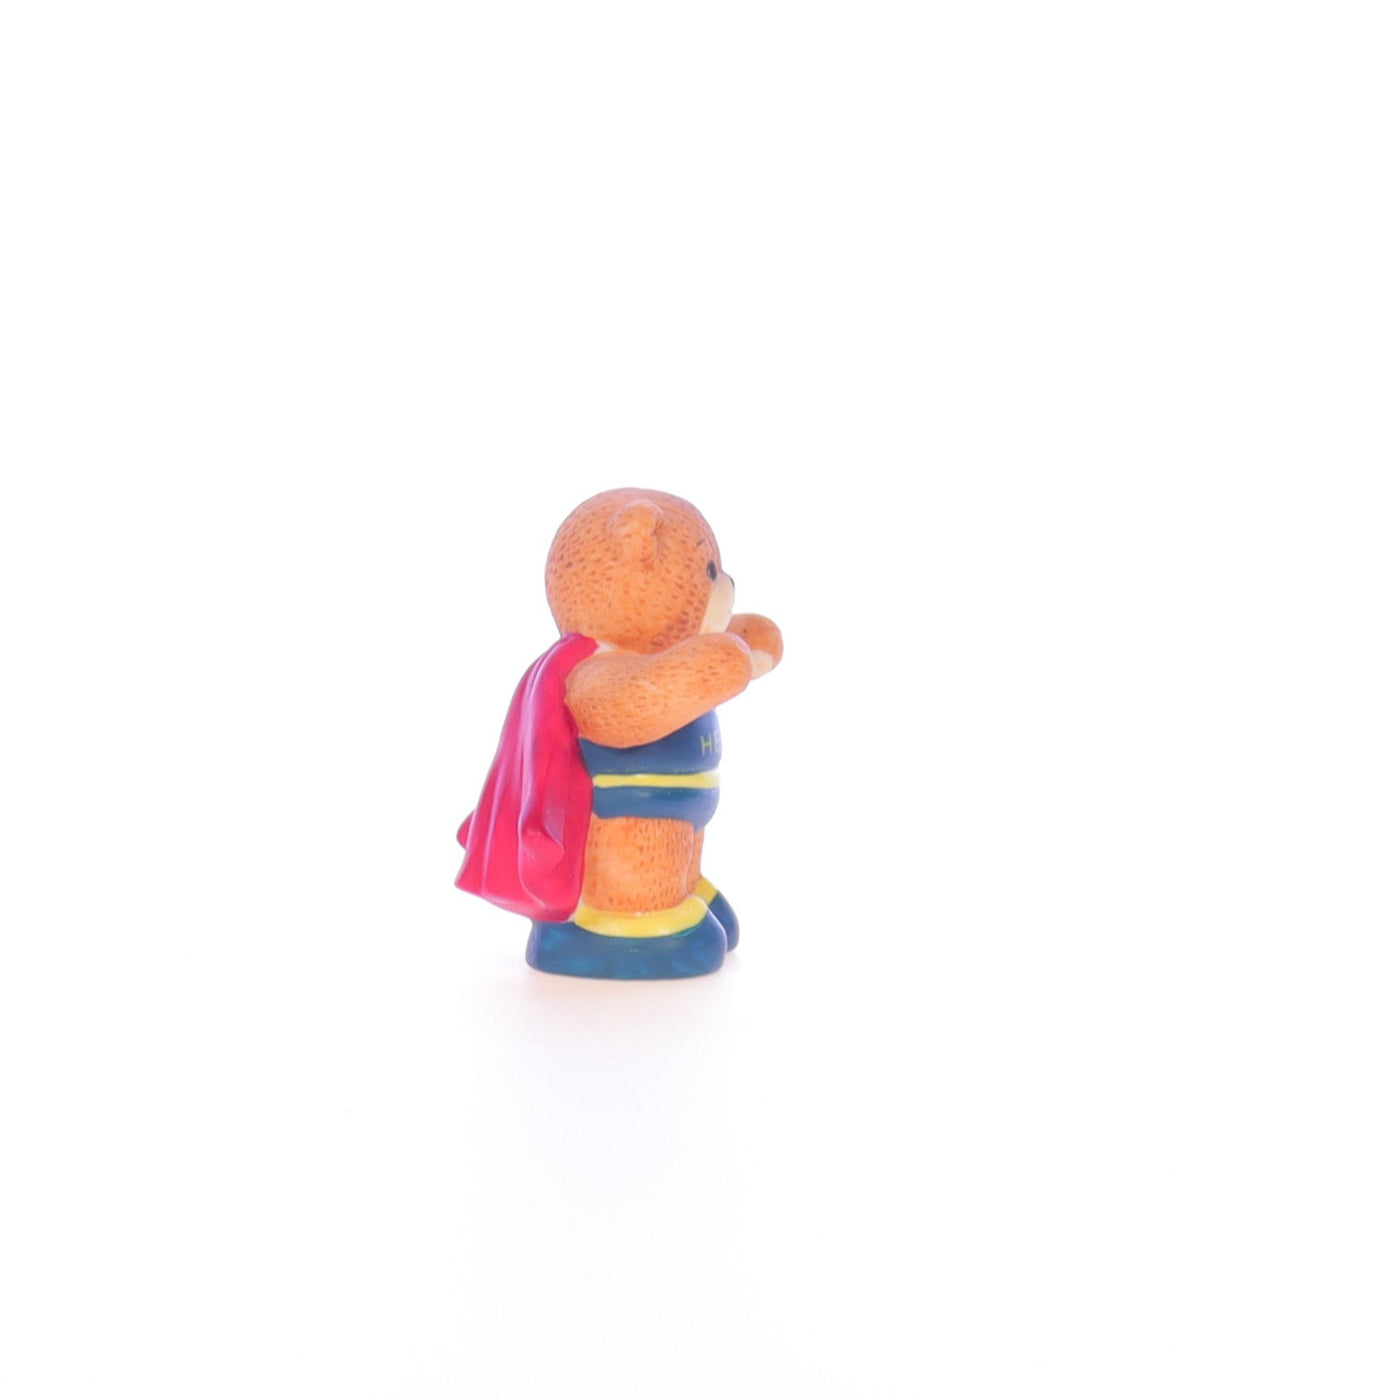 Lucy_And_Me_by_Lucy_Atwell_Porcelain_Figurine_Bear_in_Super_Hero_Costume_Lucy_Unknown_029_07